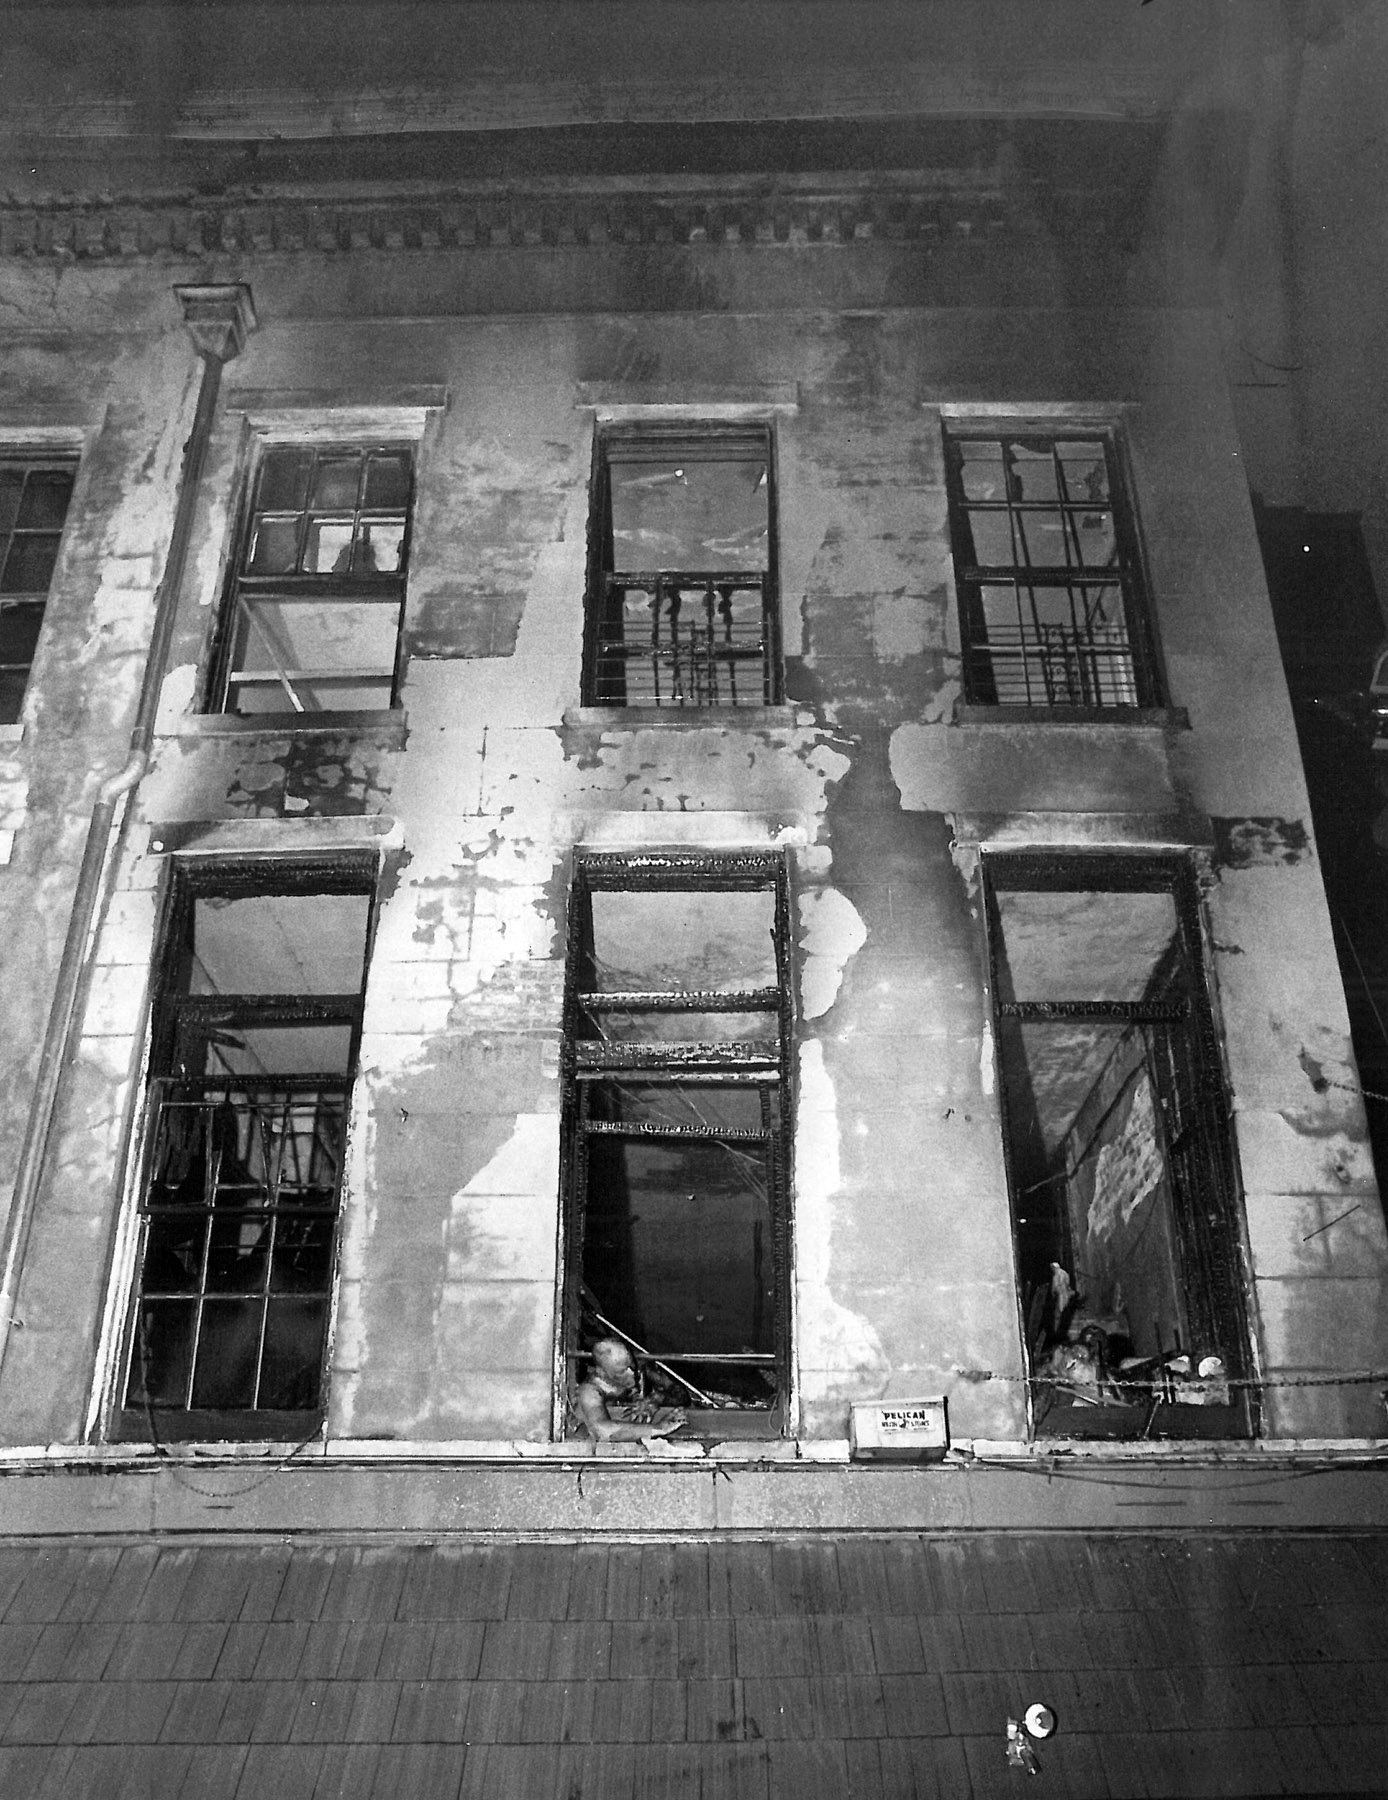 The MCC Rev. Bill Larson tried to push an air-conditioning unit out one of the windows to make an escape route between the bars. He was halfway out when the windowpane above fell and trapped him. His mannequin-like corpse remained in the window for hours after the fire. Thirty-two people were killed.